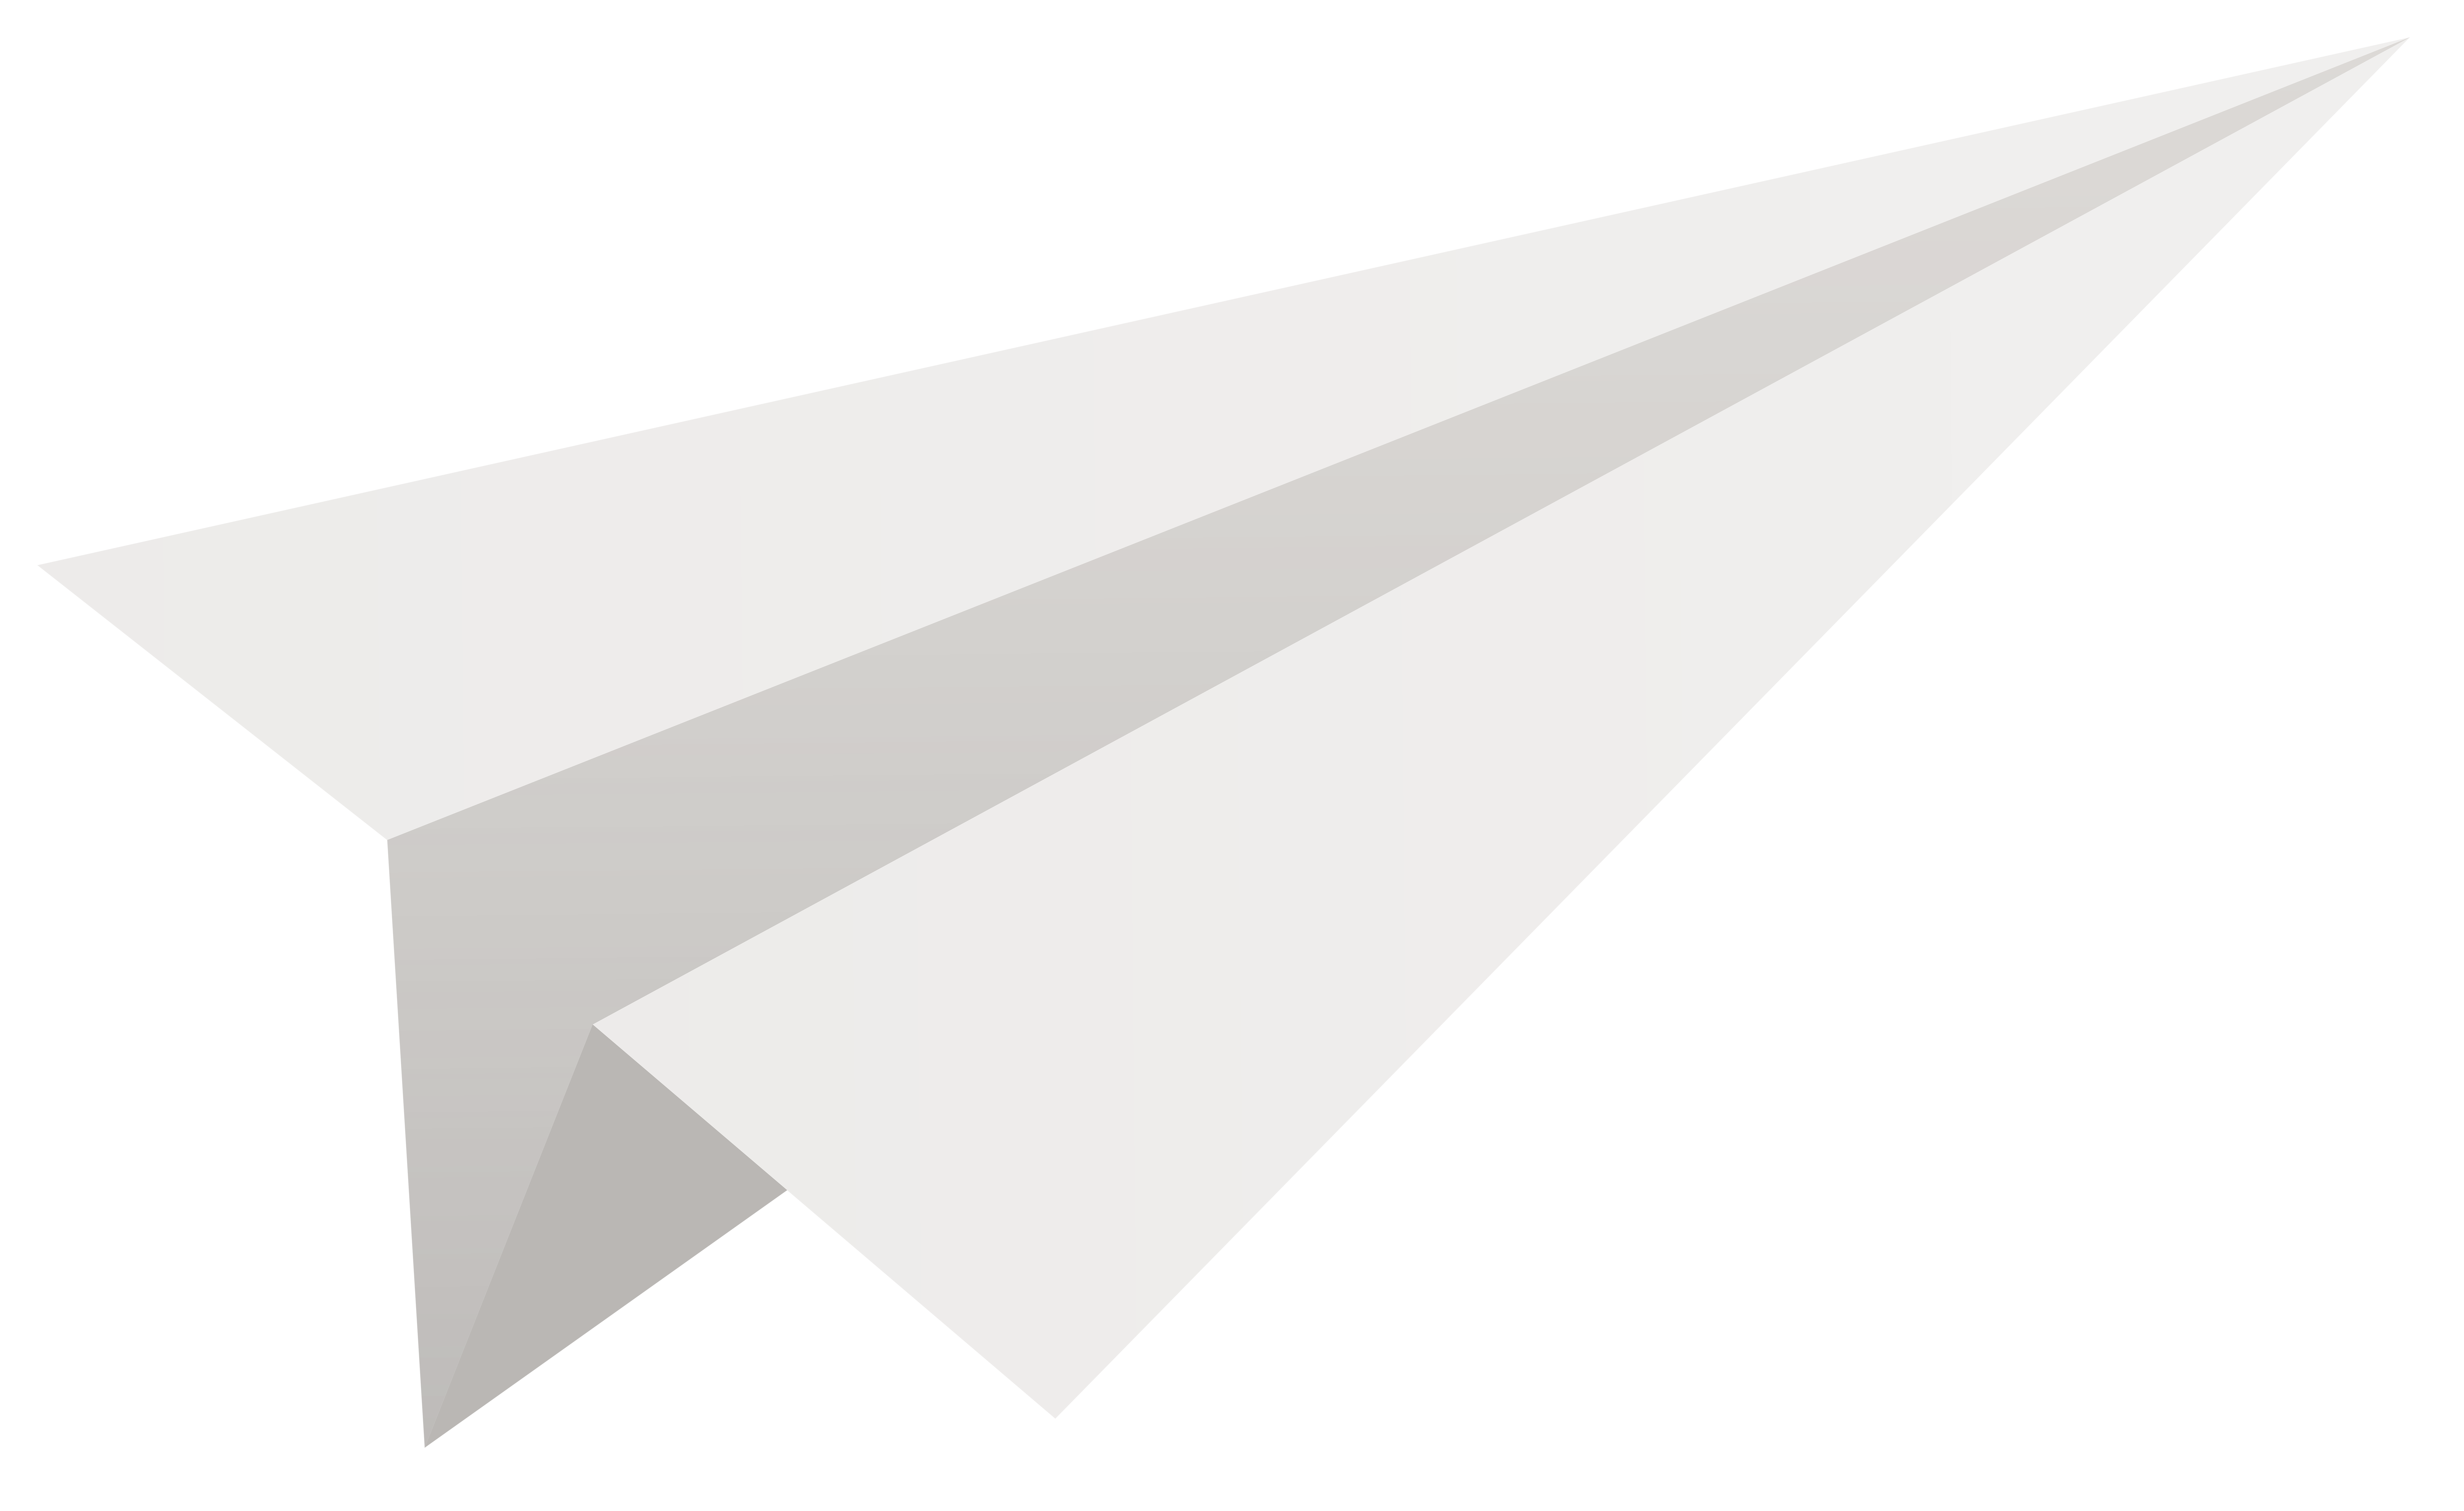 clipart airplane white paper